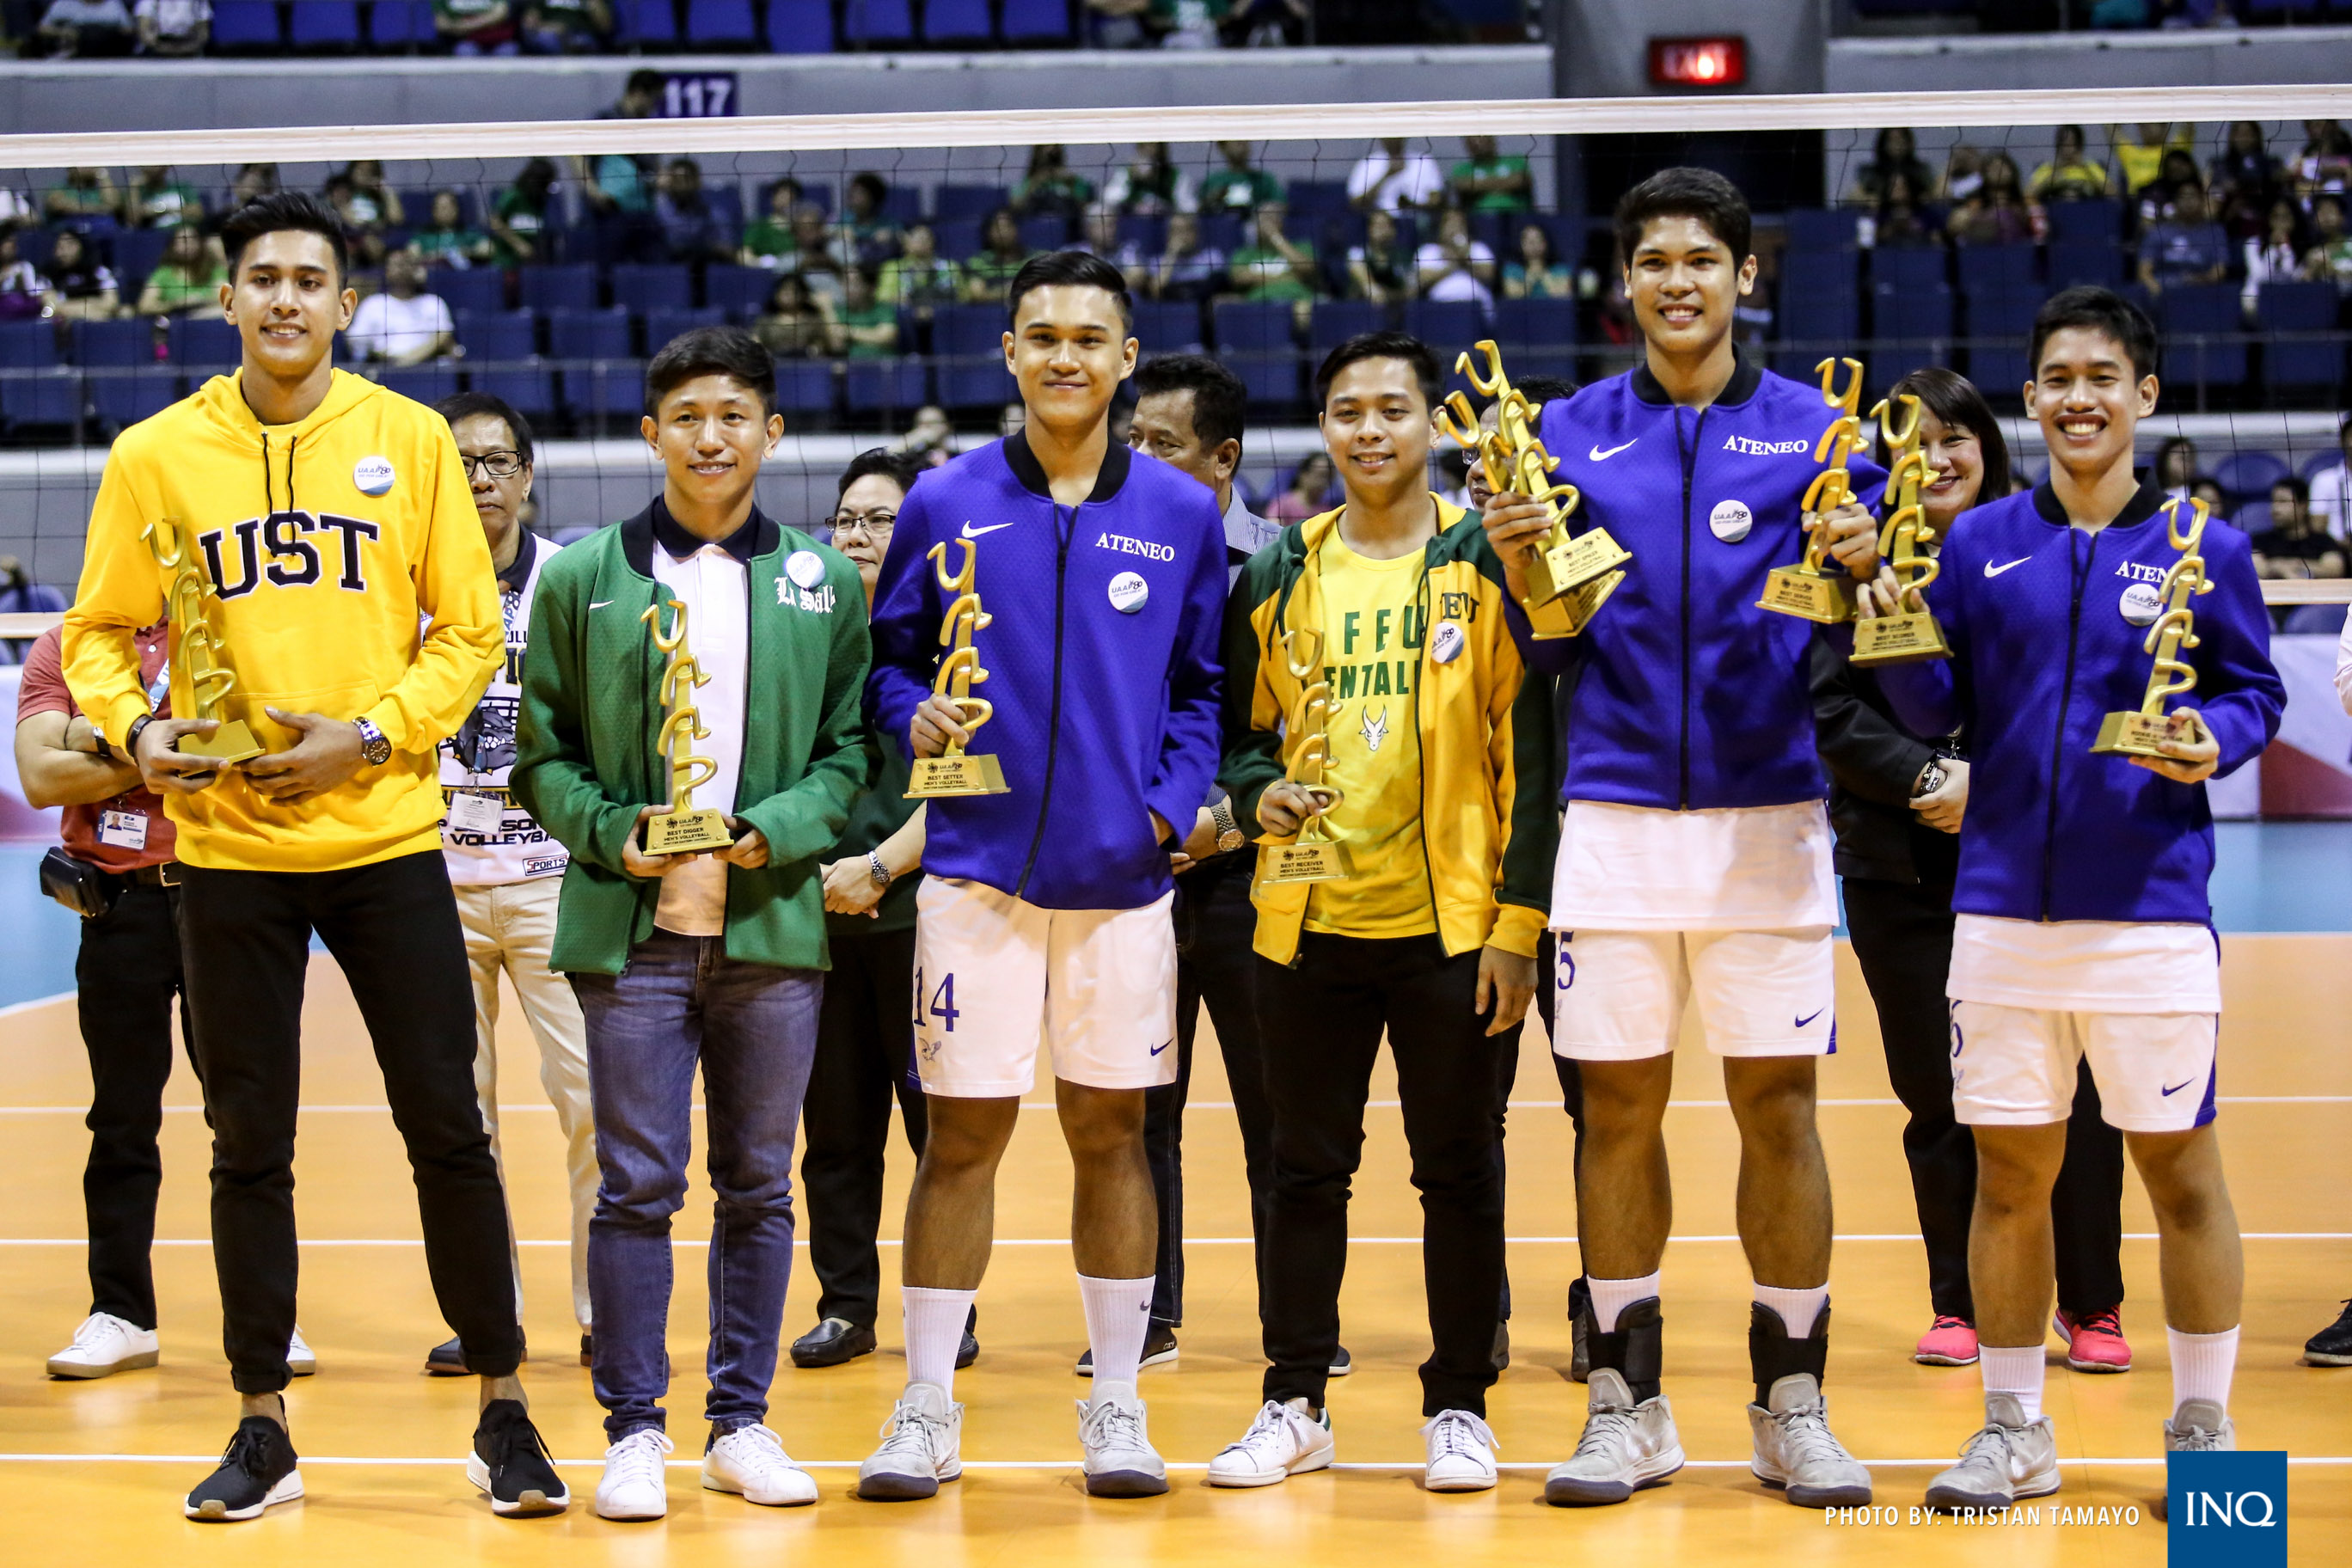 GALLERY: UAAP Season 80 volleyball awardees | Inquirer Sports